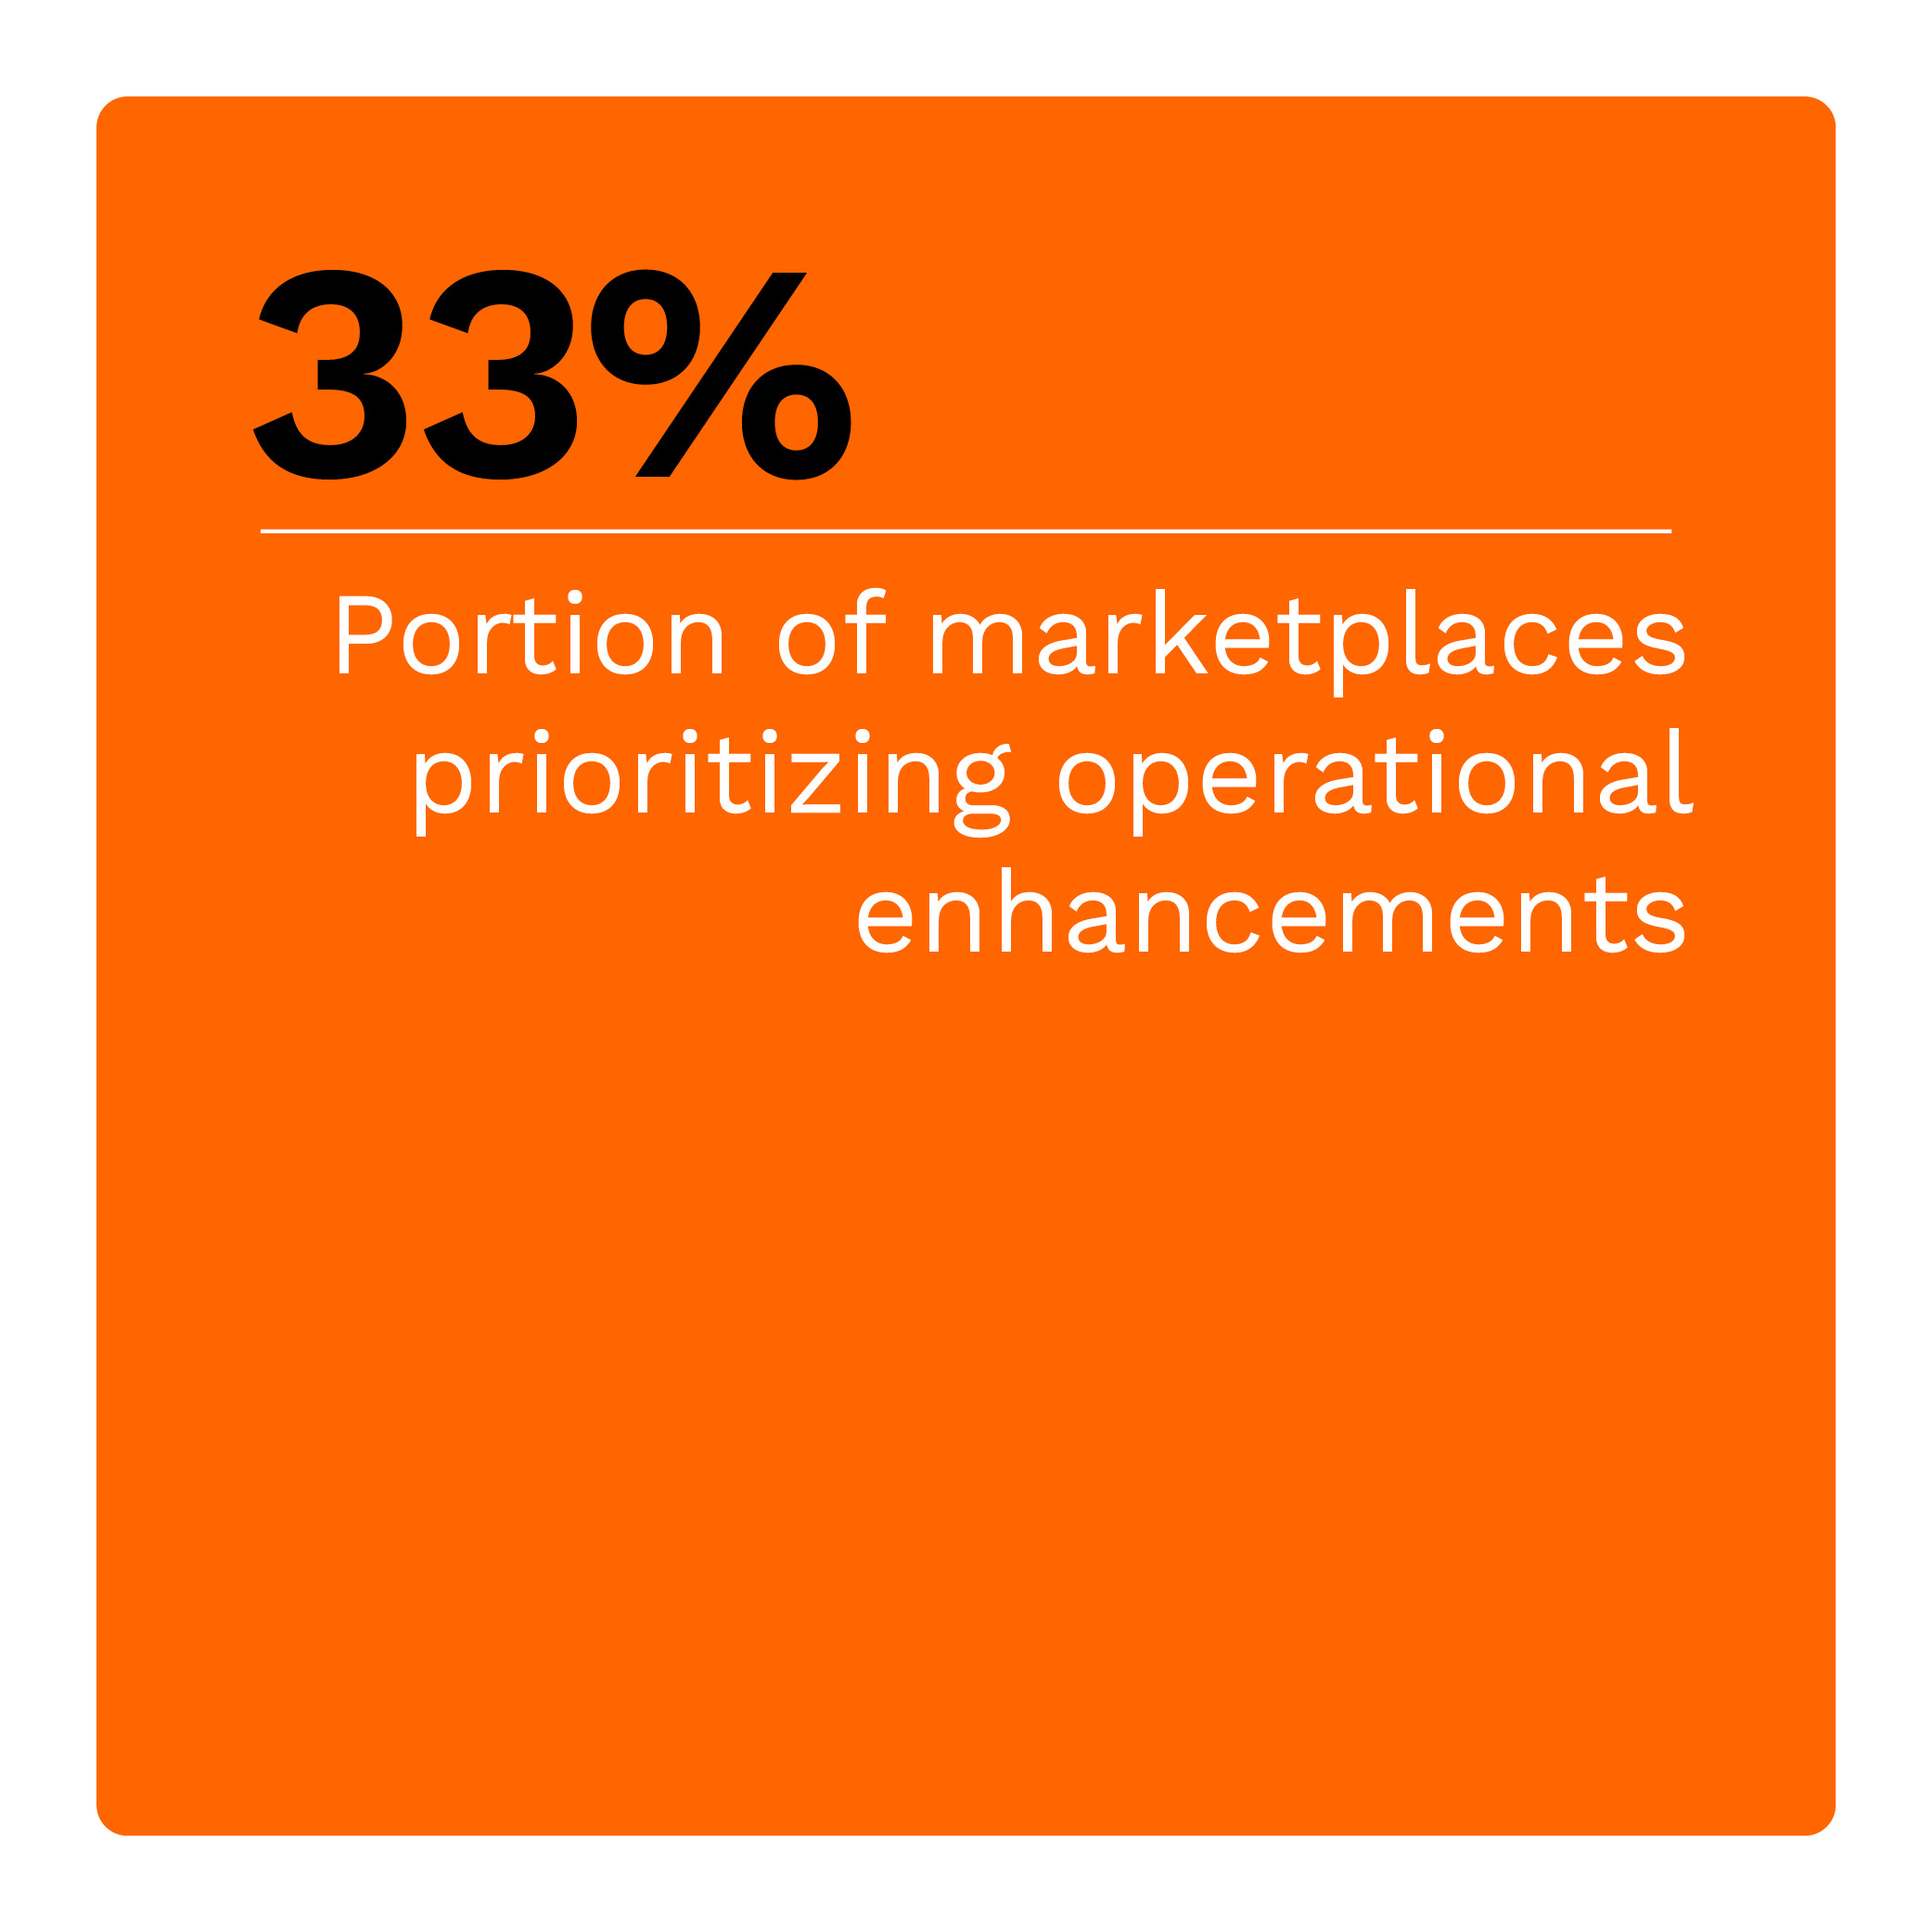 33%: Portion of marketplaces prioritizing operational enhancements